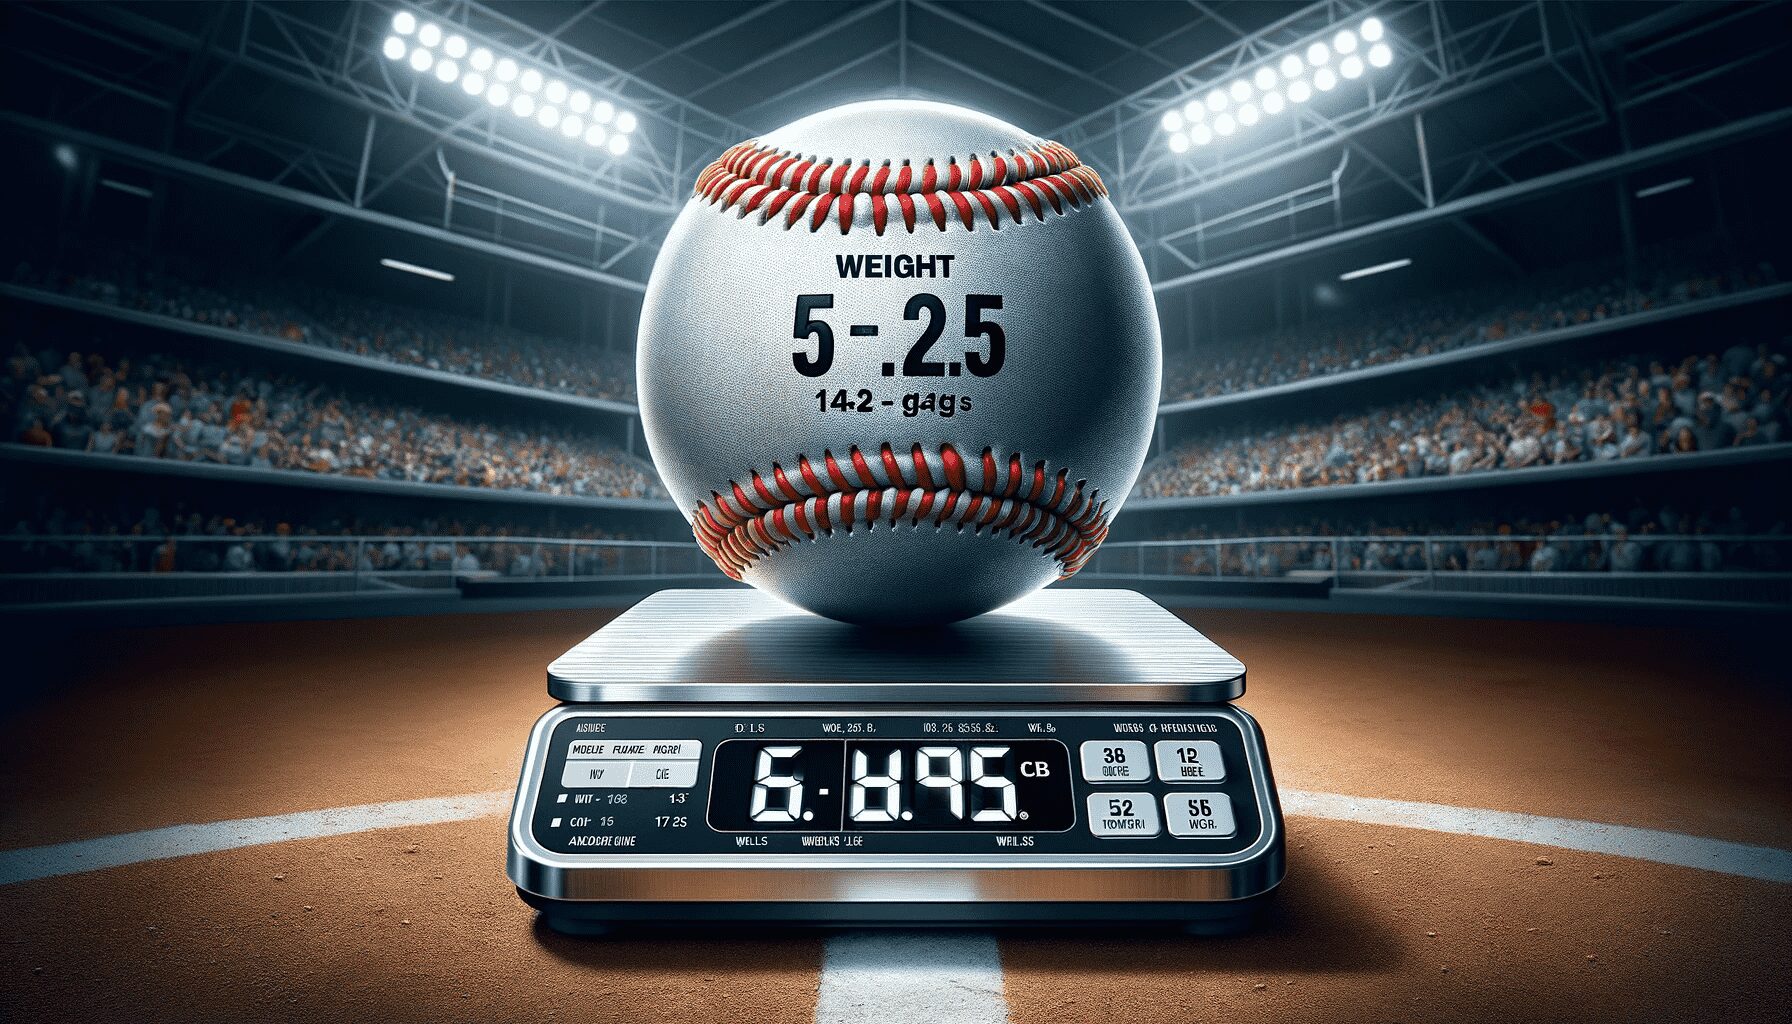 How Much Does a Baseball Weigh? From Pitches to Ounces!